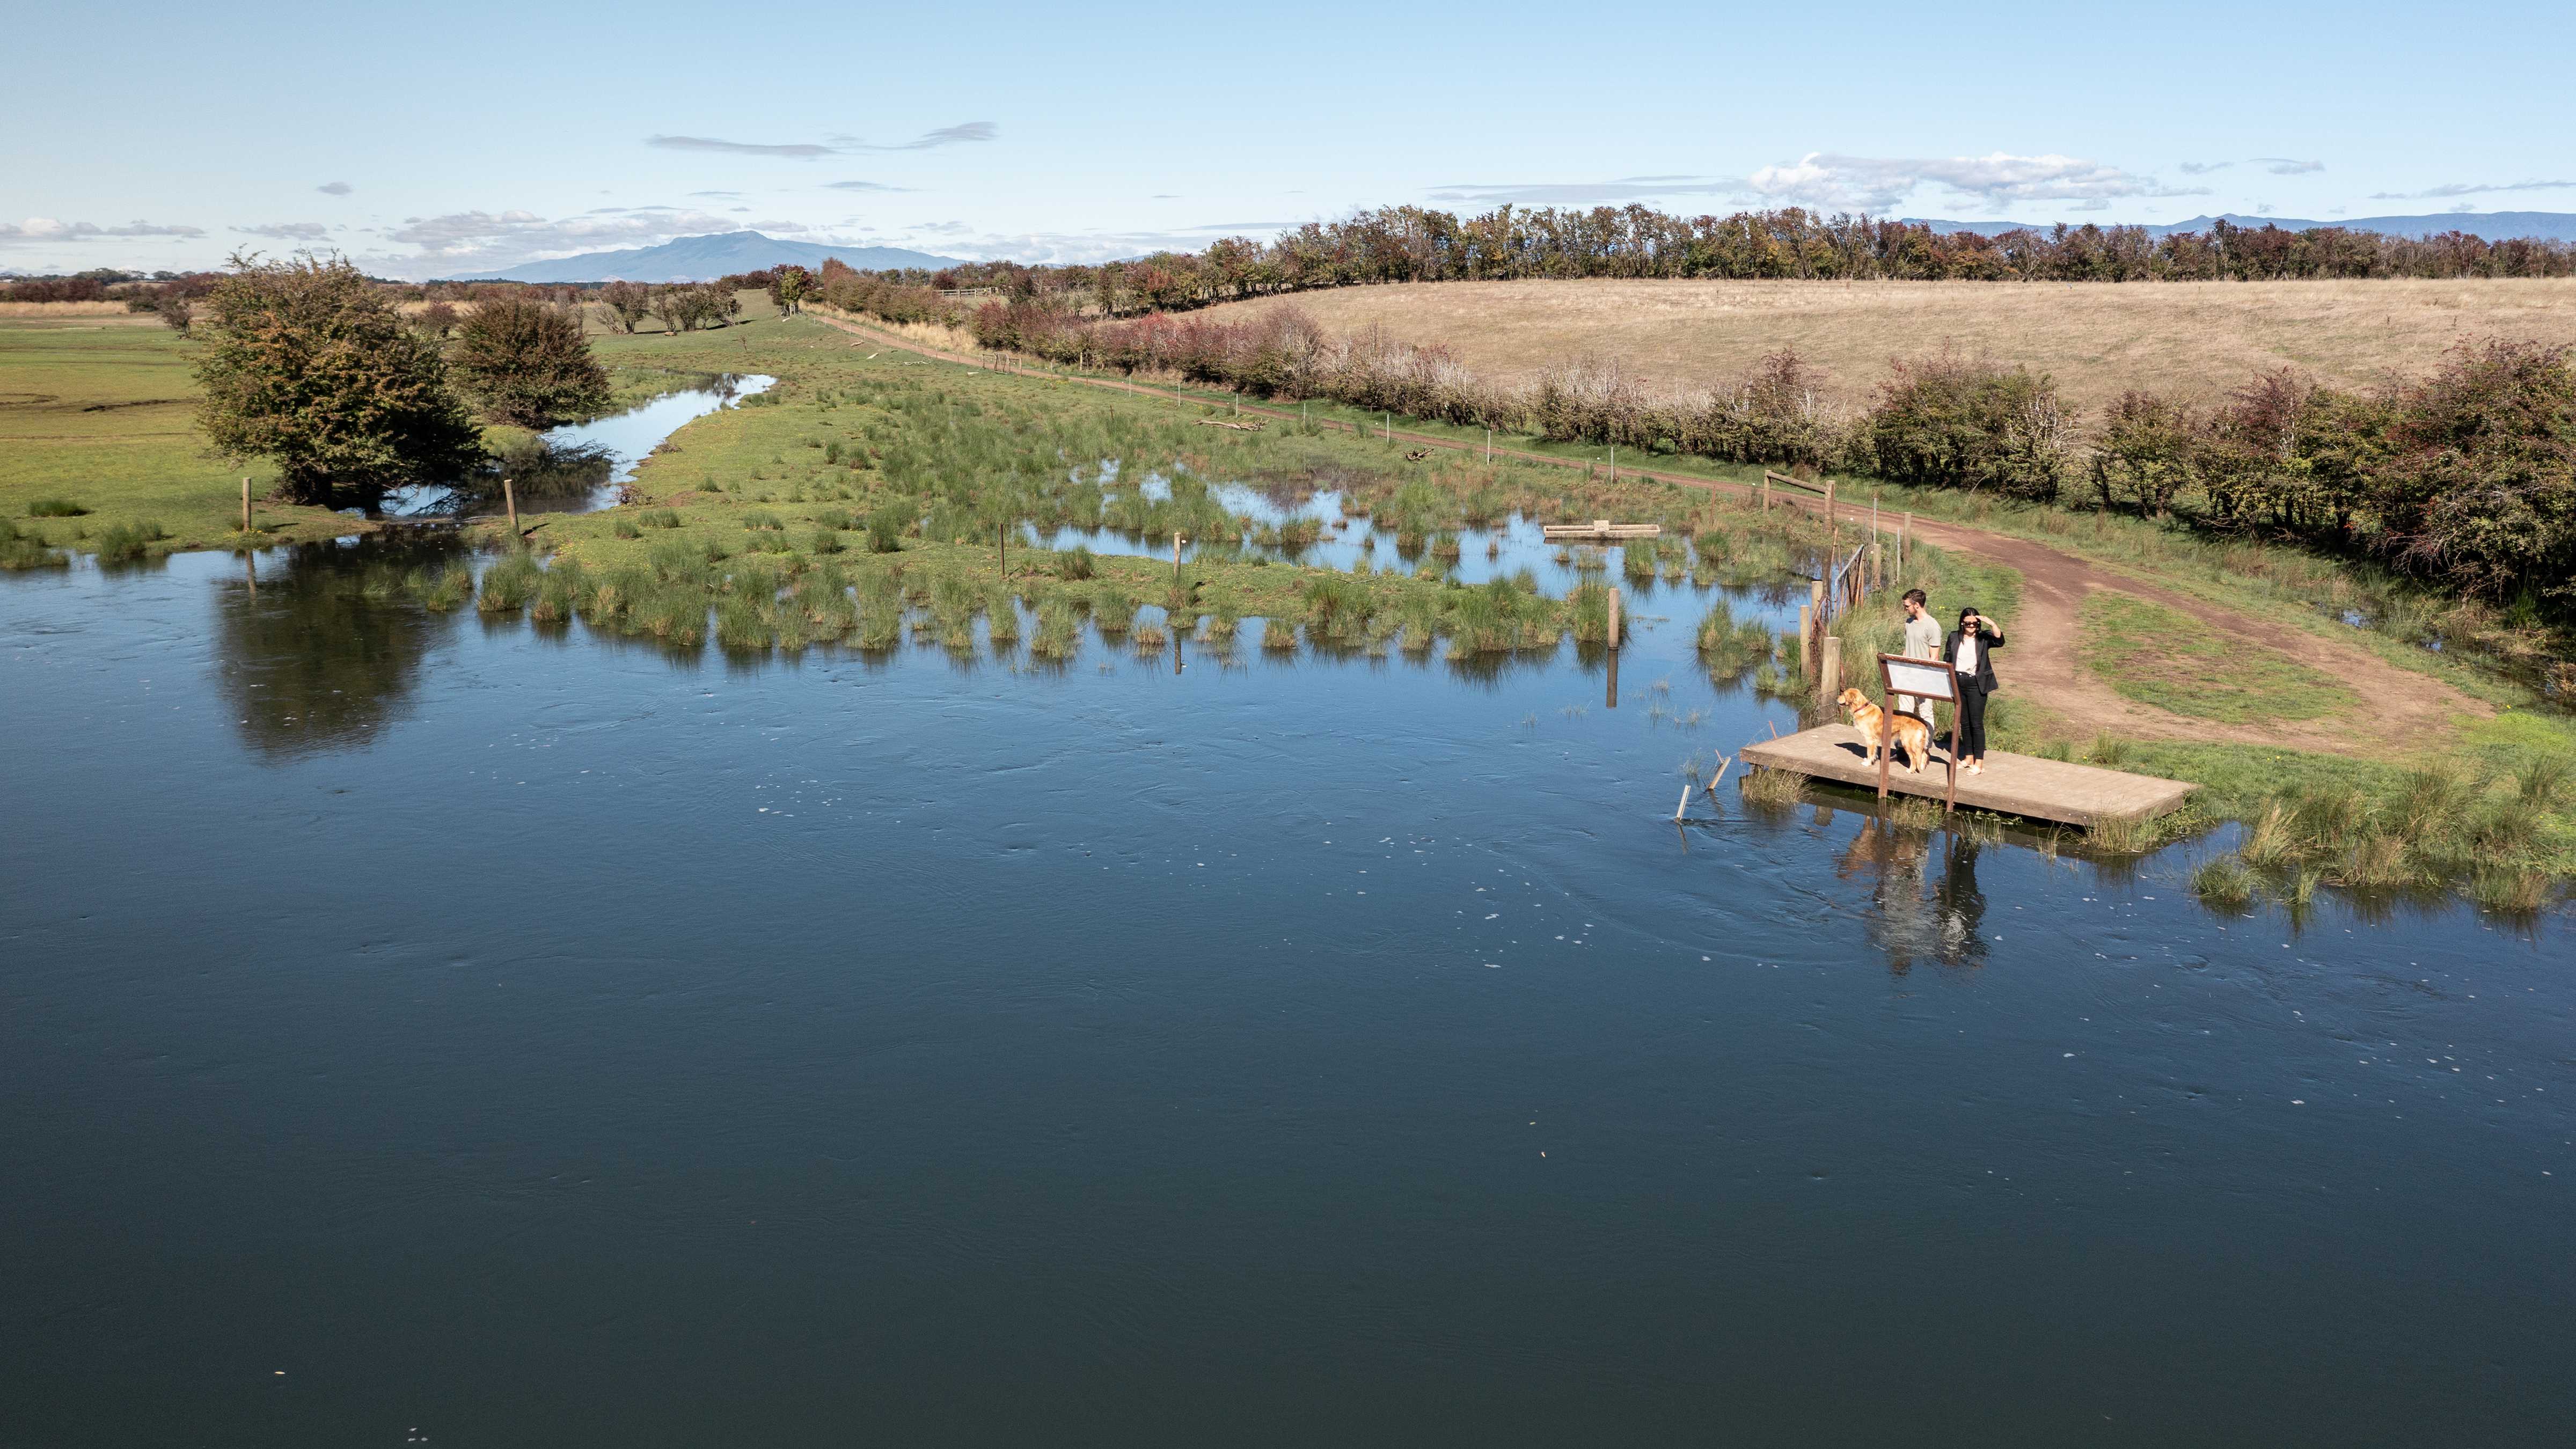 A couple and a dog stand on the jetty on the banks of the Macquarie River. The river is in low flood and creeps into the paddock alongside. Hedgerow lined paddocks continue in the distance. Photo: Kate von Stieglitz / Tourism Australia.